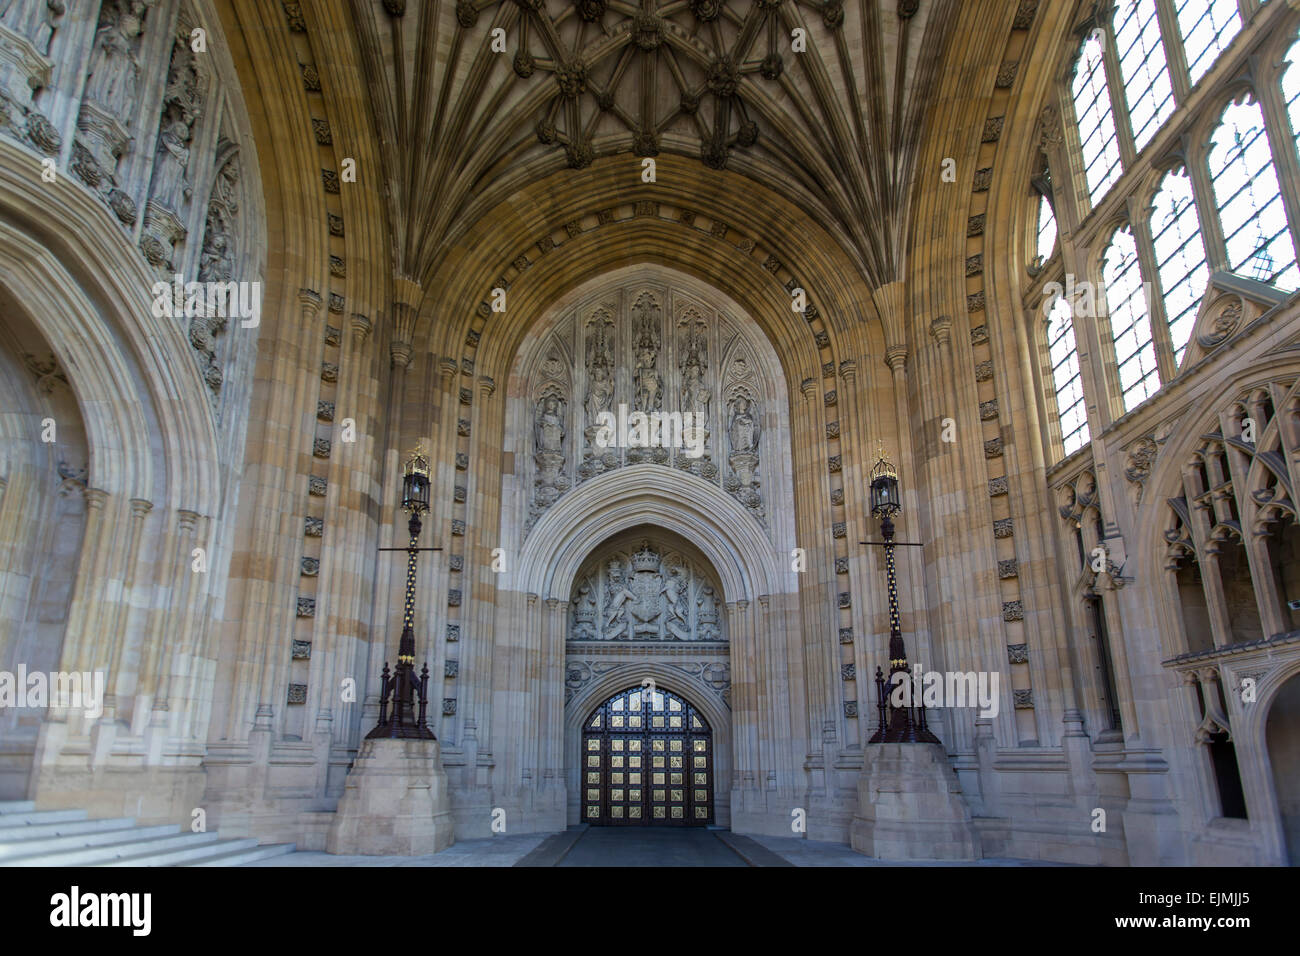 Sovereign's Entrance, Westminster Palace, London Stock Photo